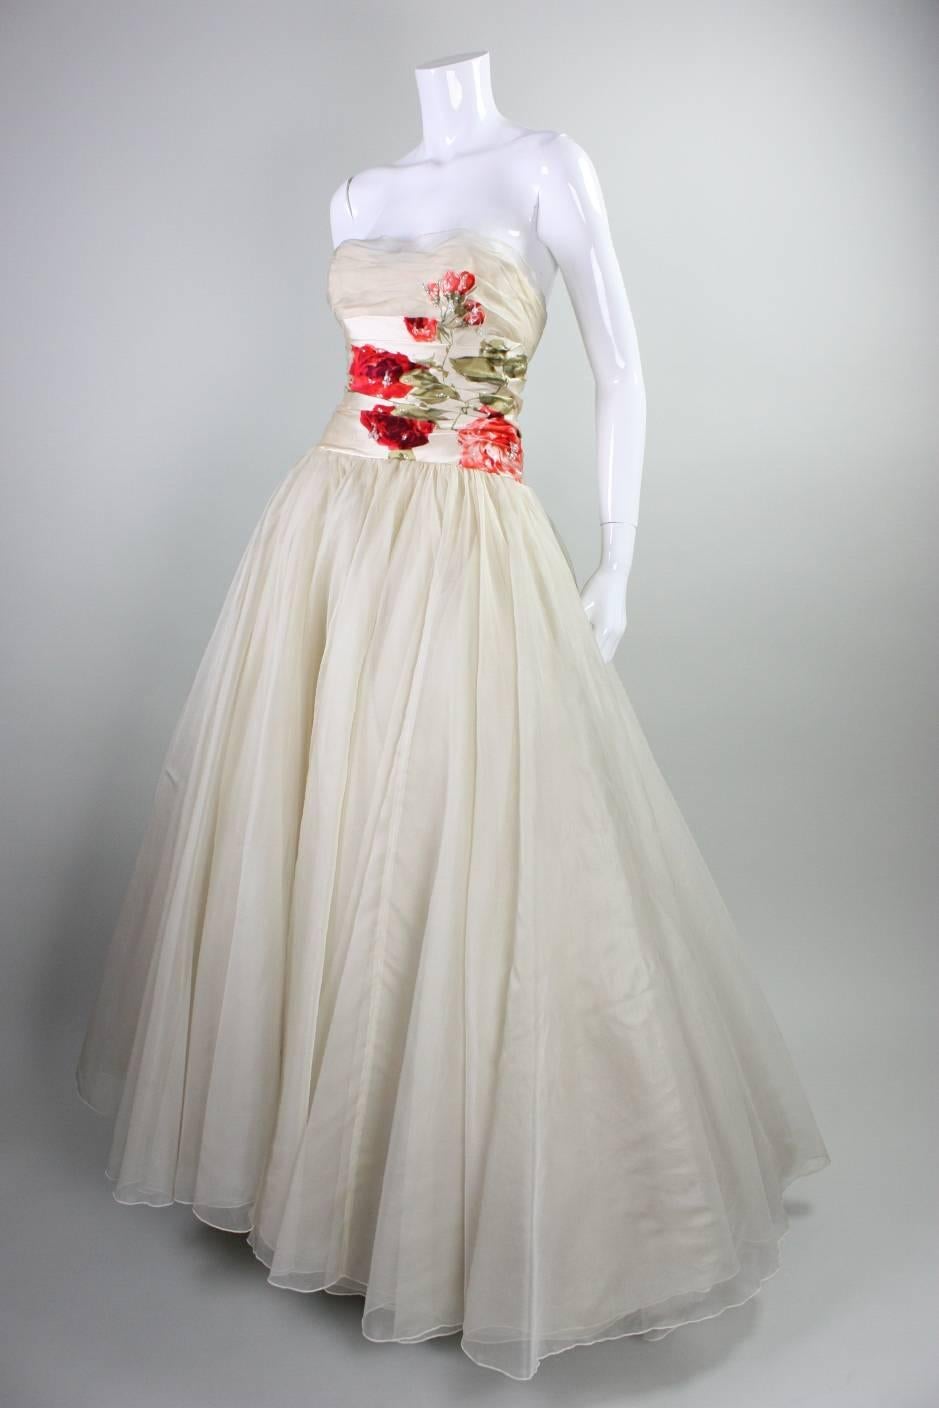 Vintage anonymous ball gown dates to the 1950's and is made of multiple layers of cream silk organza.  Silk satin waistband and skirt panels feature striking red cut velvet flowers with beaded detailing.  Fitted bodice is strapless and features